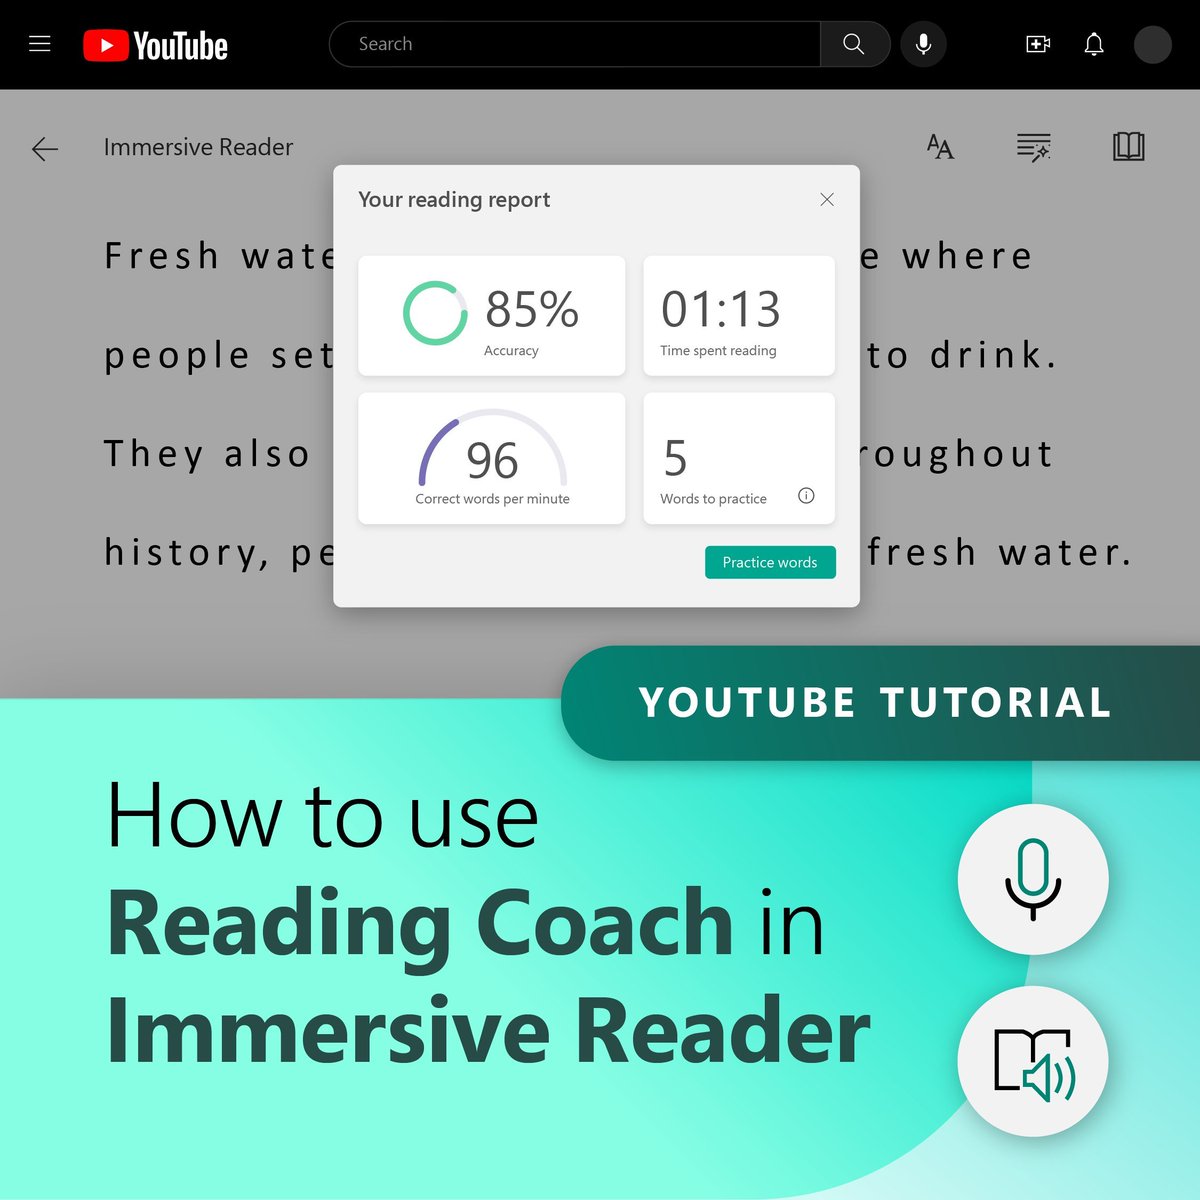 Check out this YouTube tutorial for tips on how to enable Reading Coach in Immersive Reader (all free!) and start giving students more opportunities for independent practice. 📷 📷 msft.it/6010gGbrj #MIEExpert #edchat #dyslexia